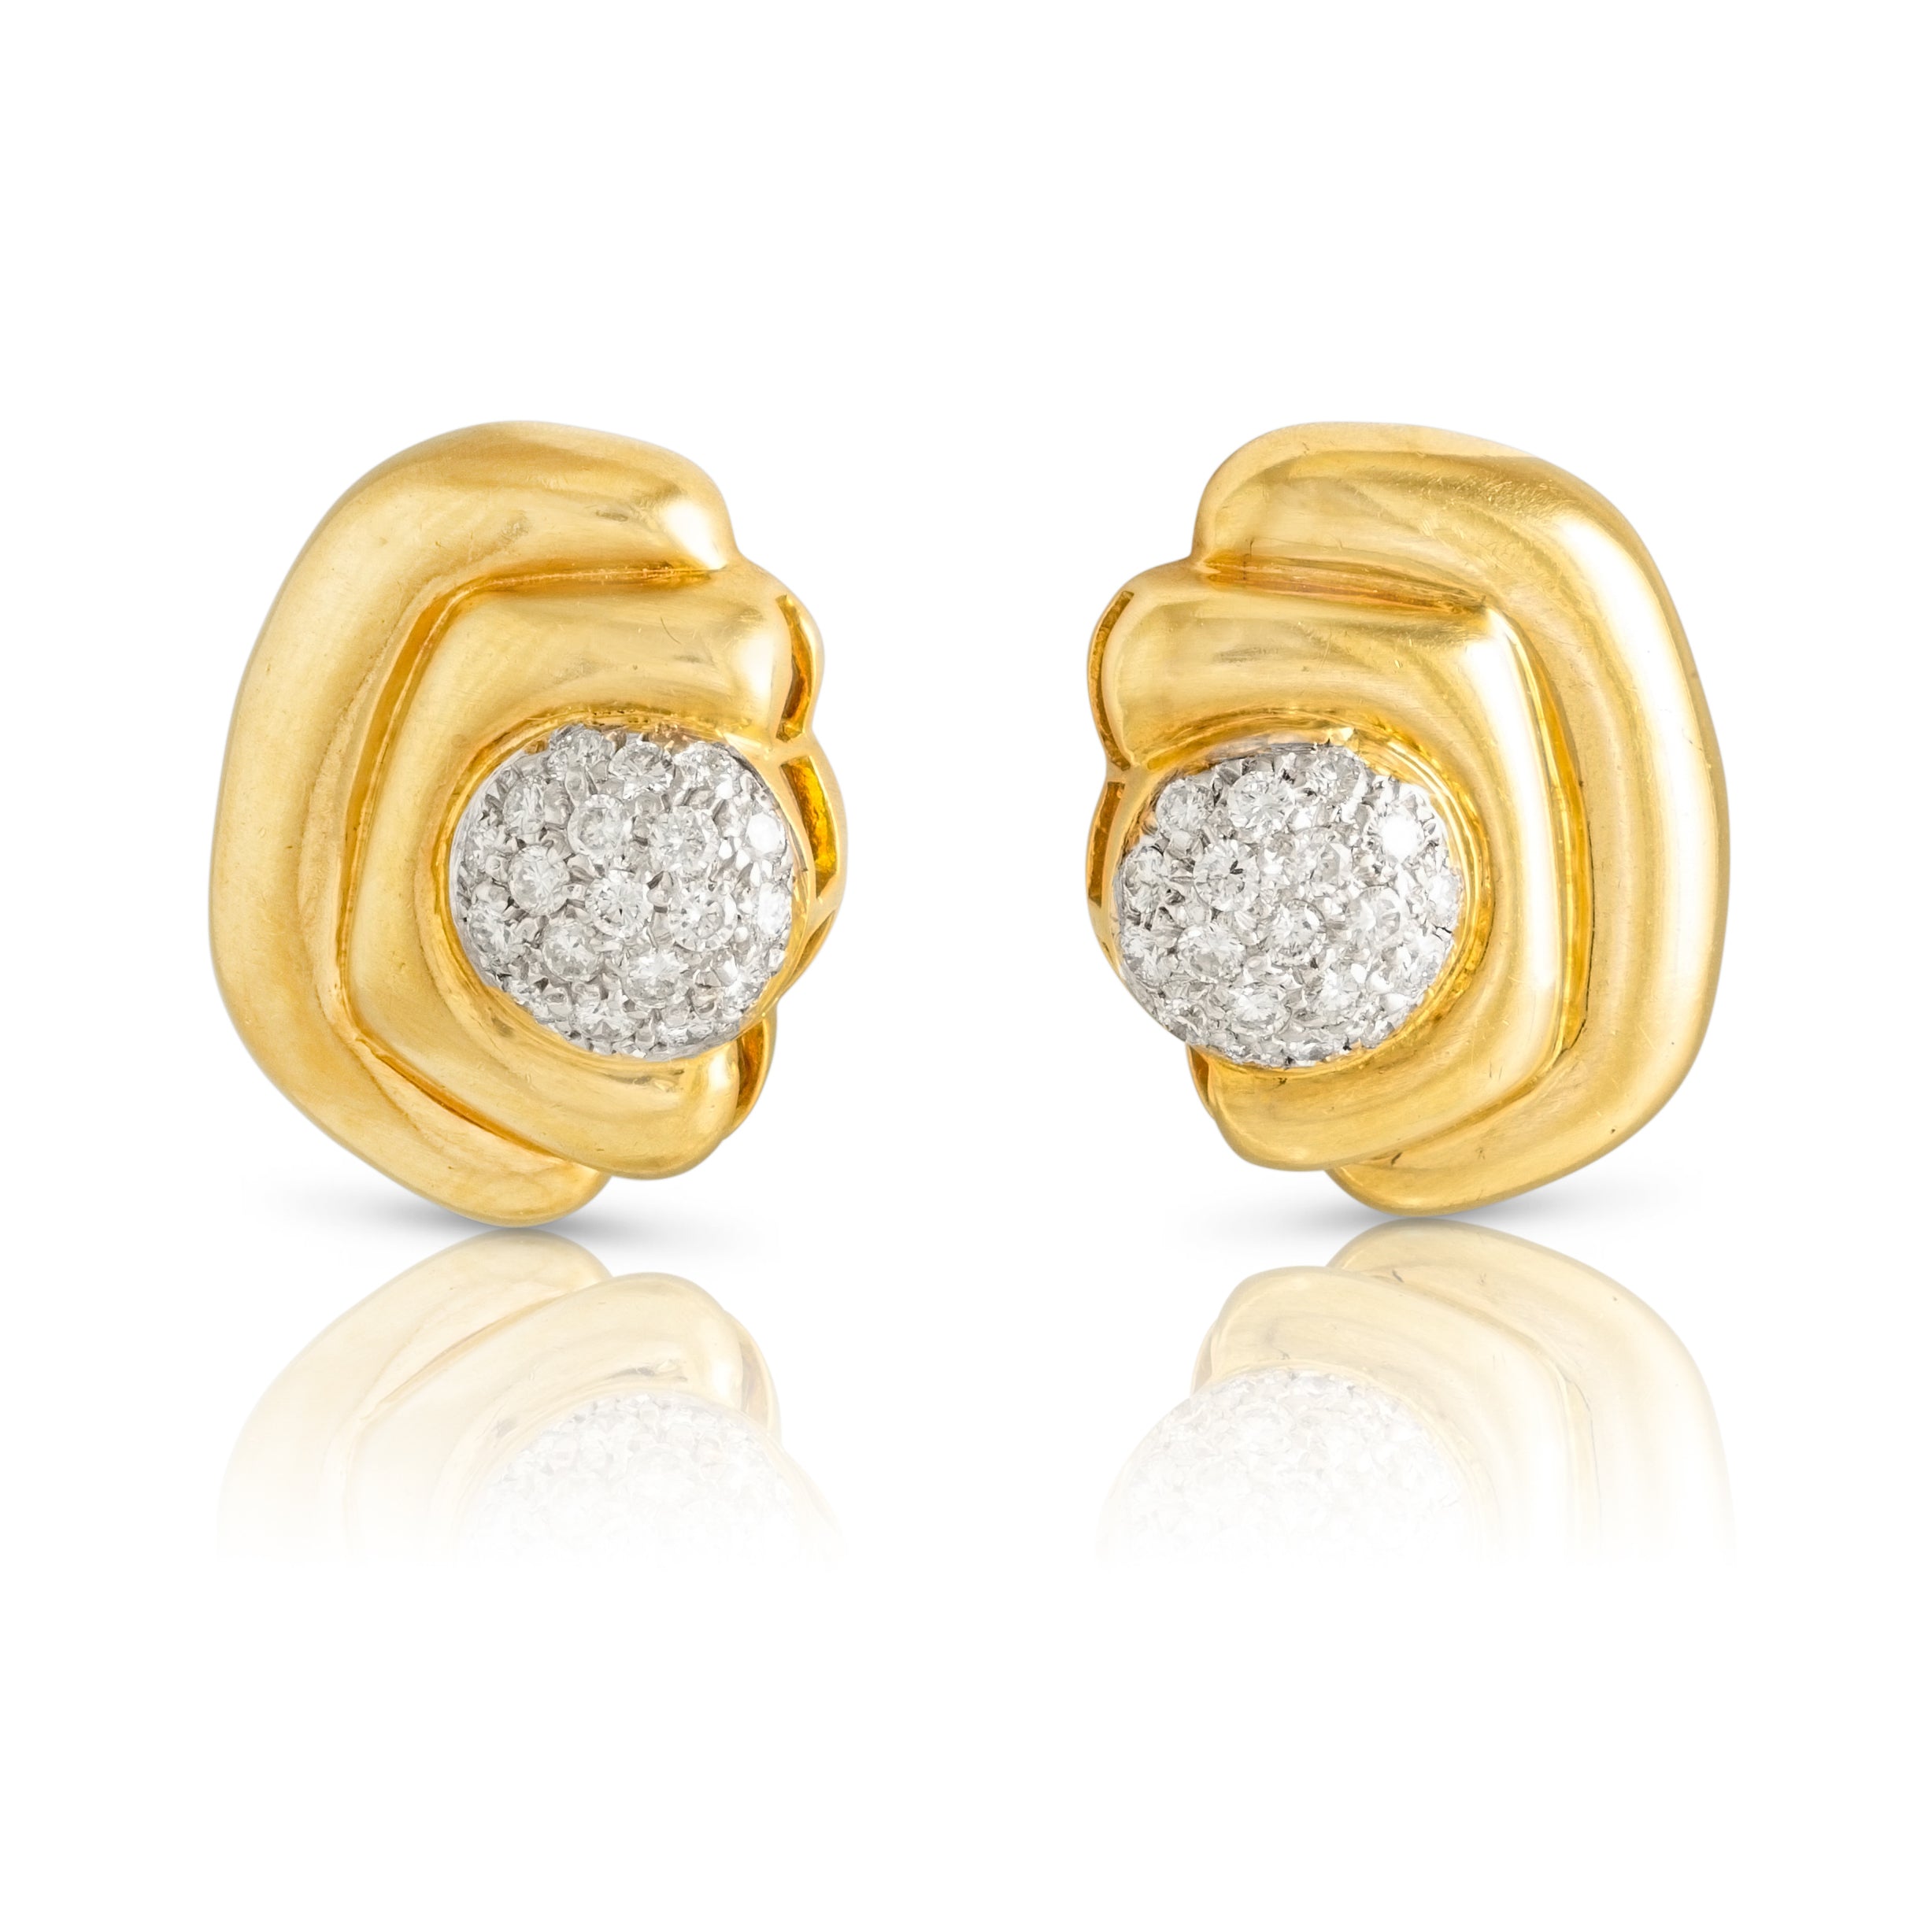 Gold drop earrings in bracket design and diamond centres.